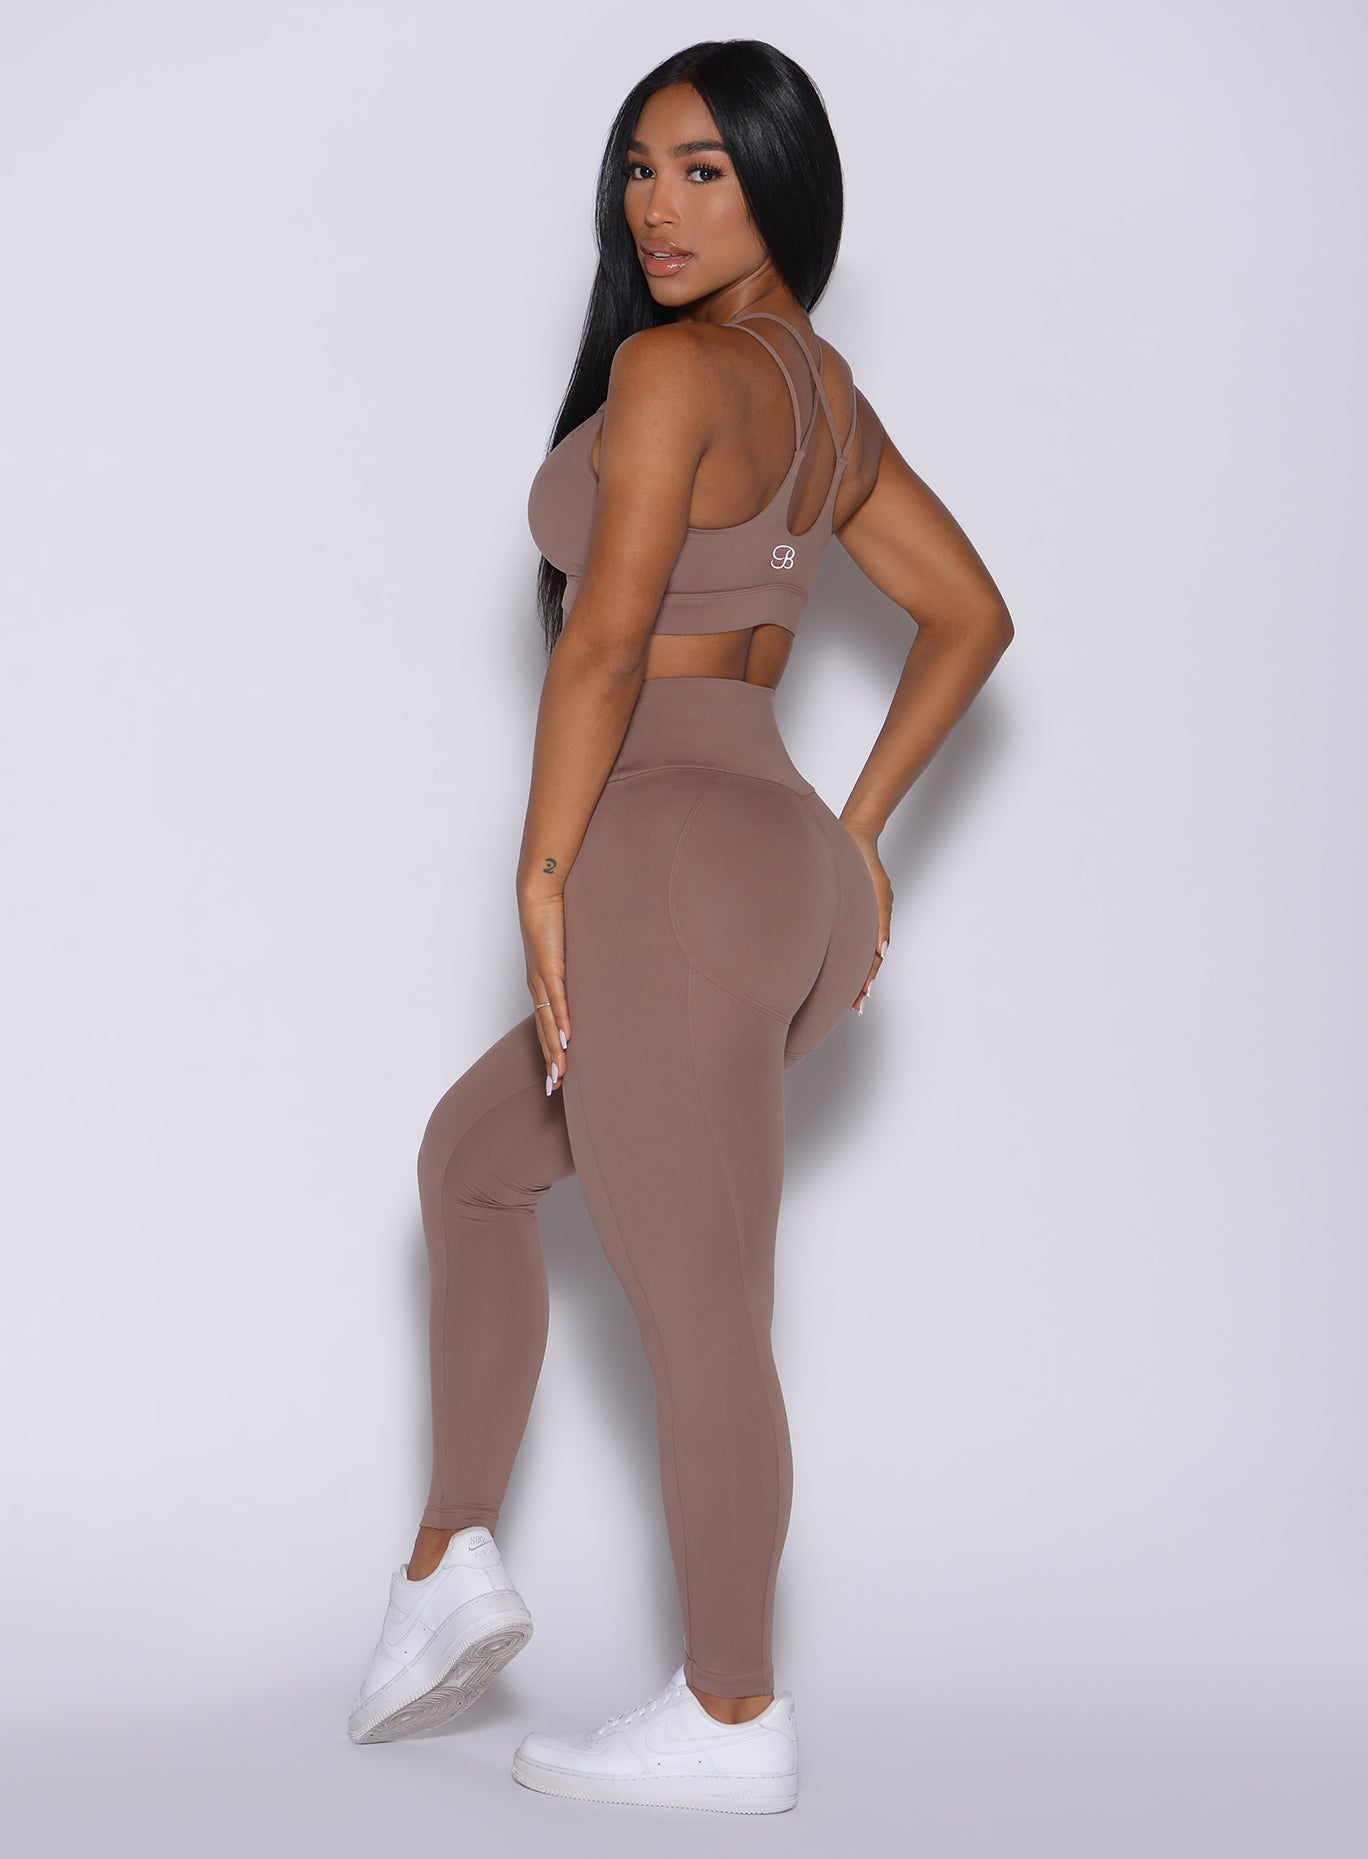 Left side profile view of a model facing to her left wearing our new and enhanced shape leggings in tan color and a matching bra